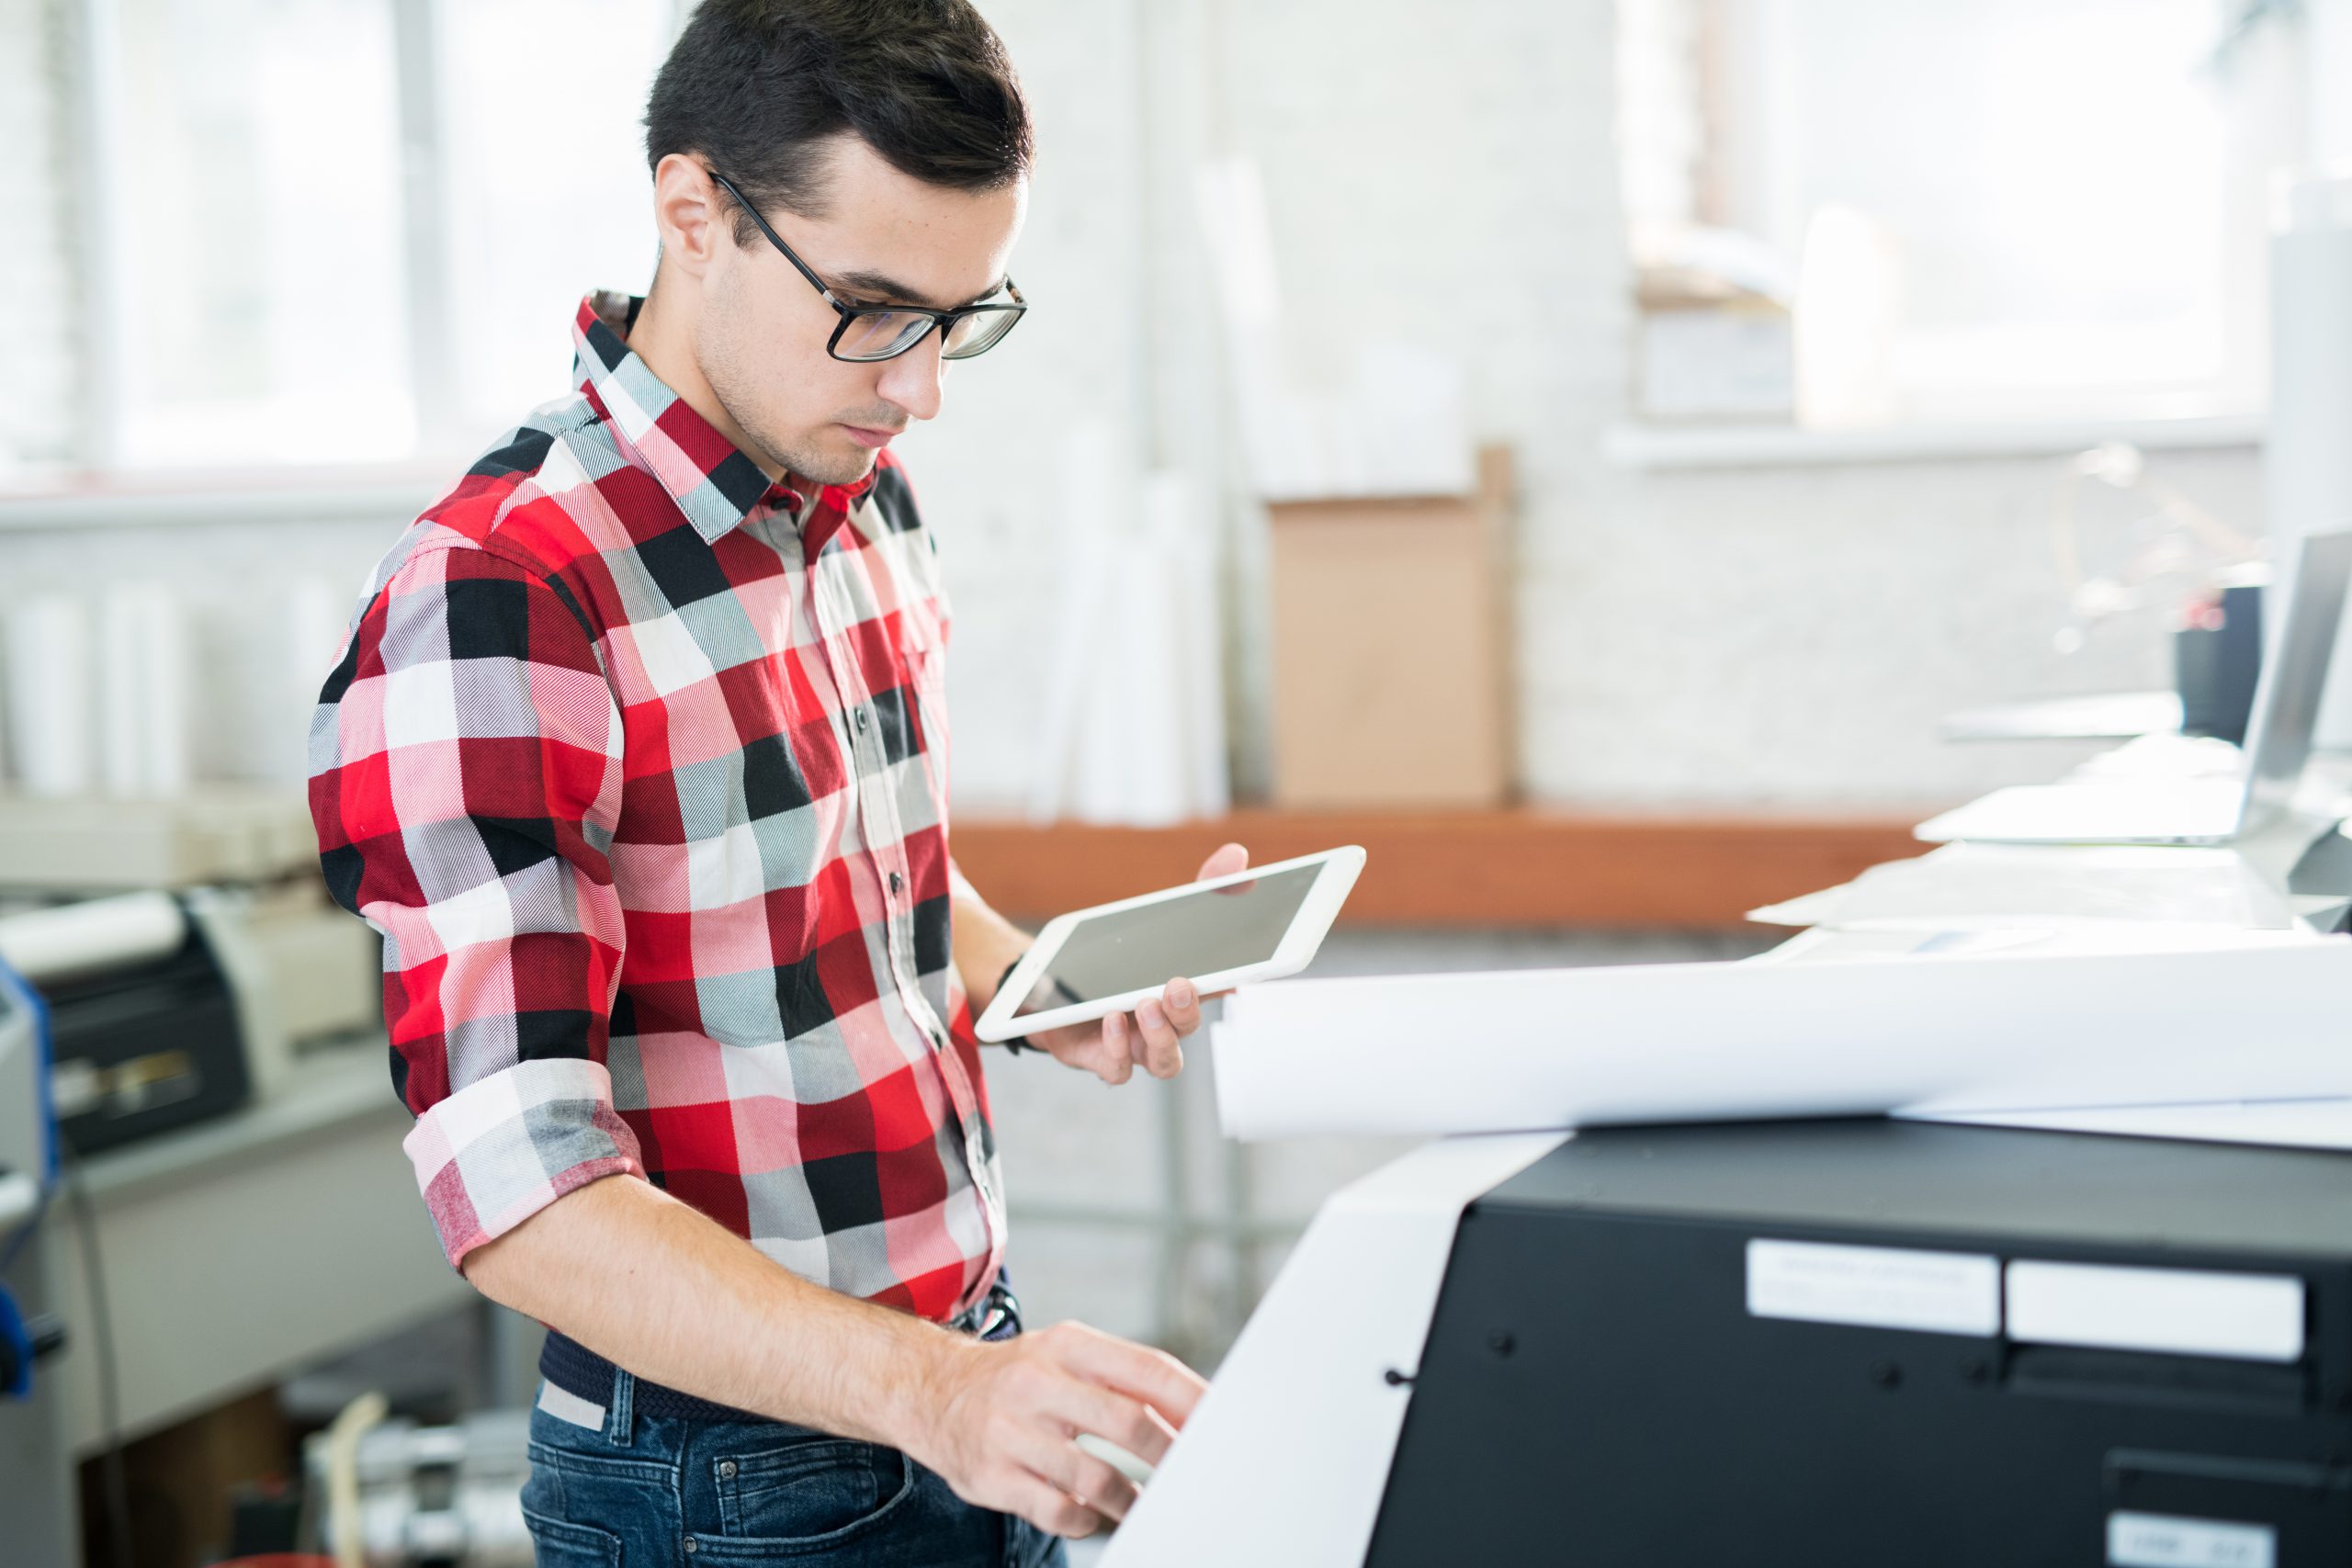 How to Get the Best Office Copier and Printer